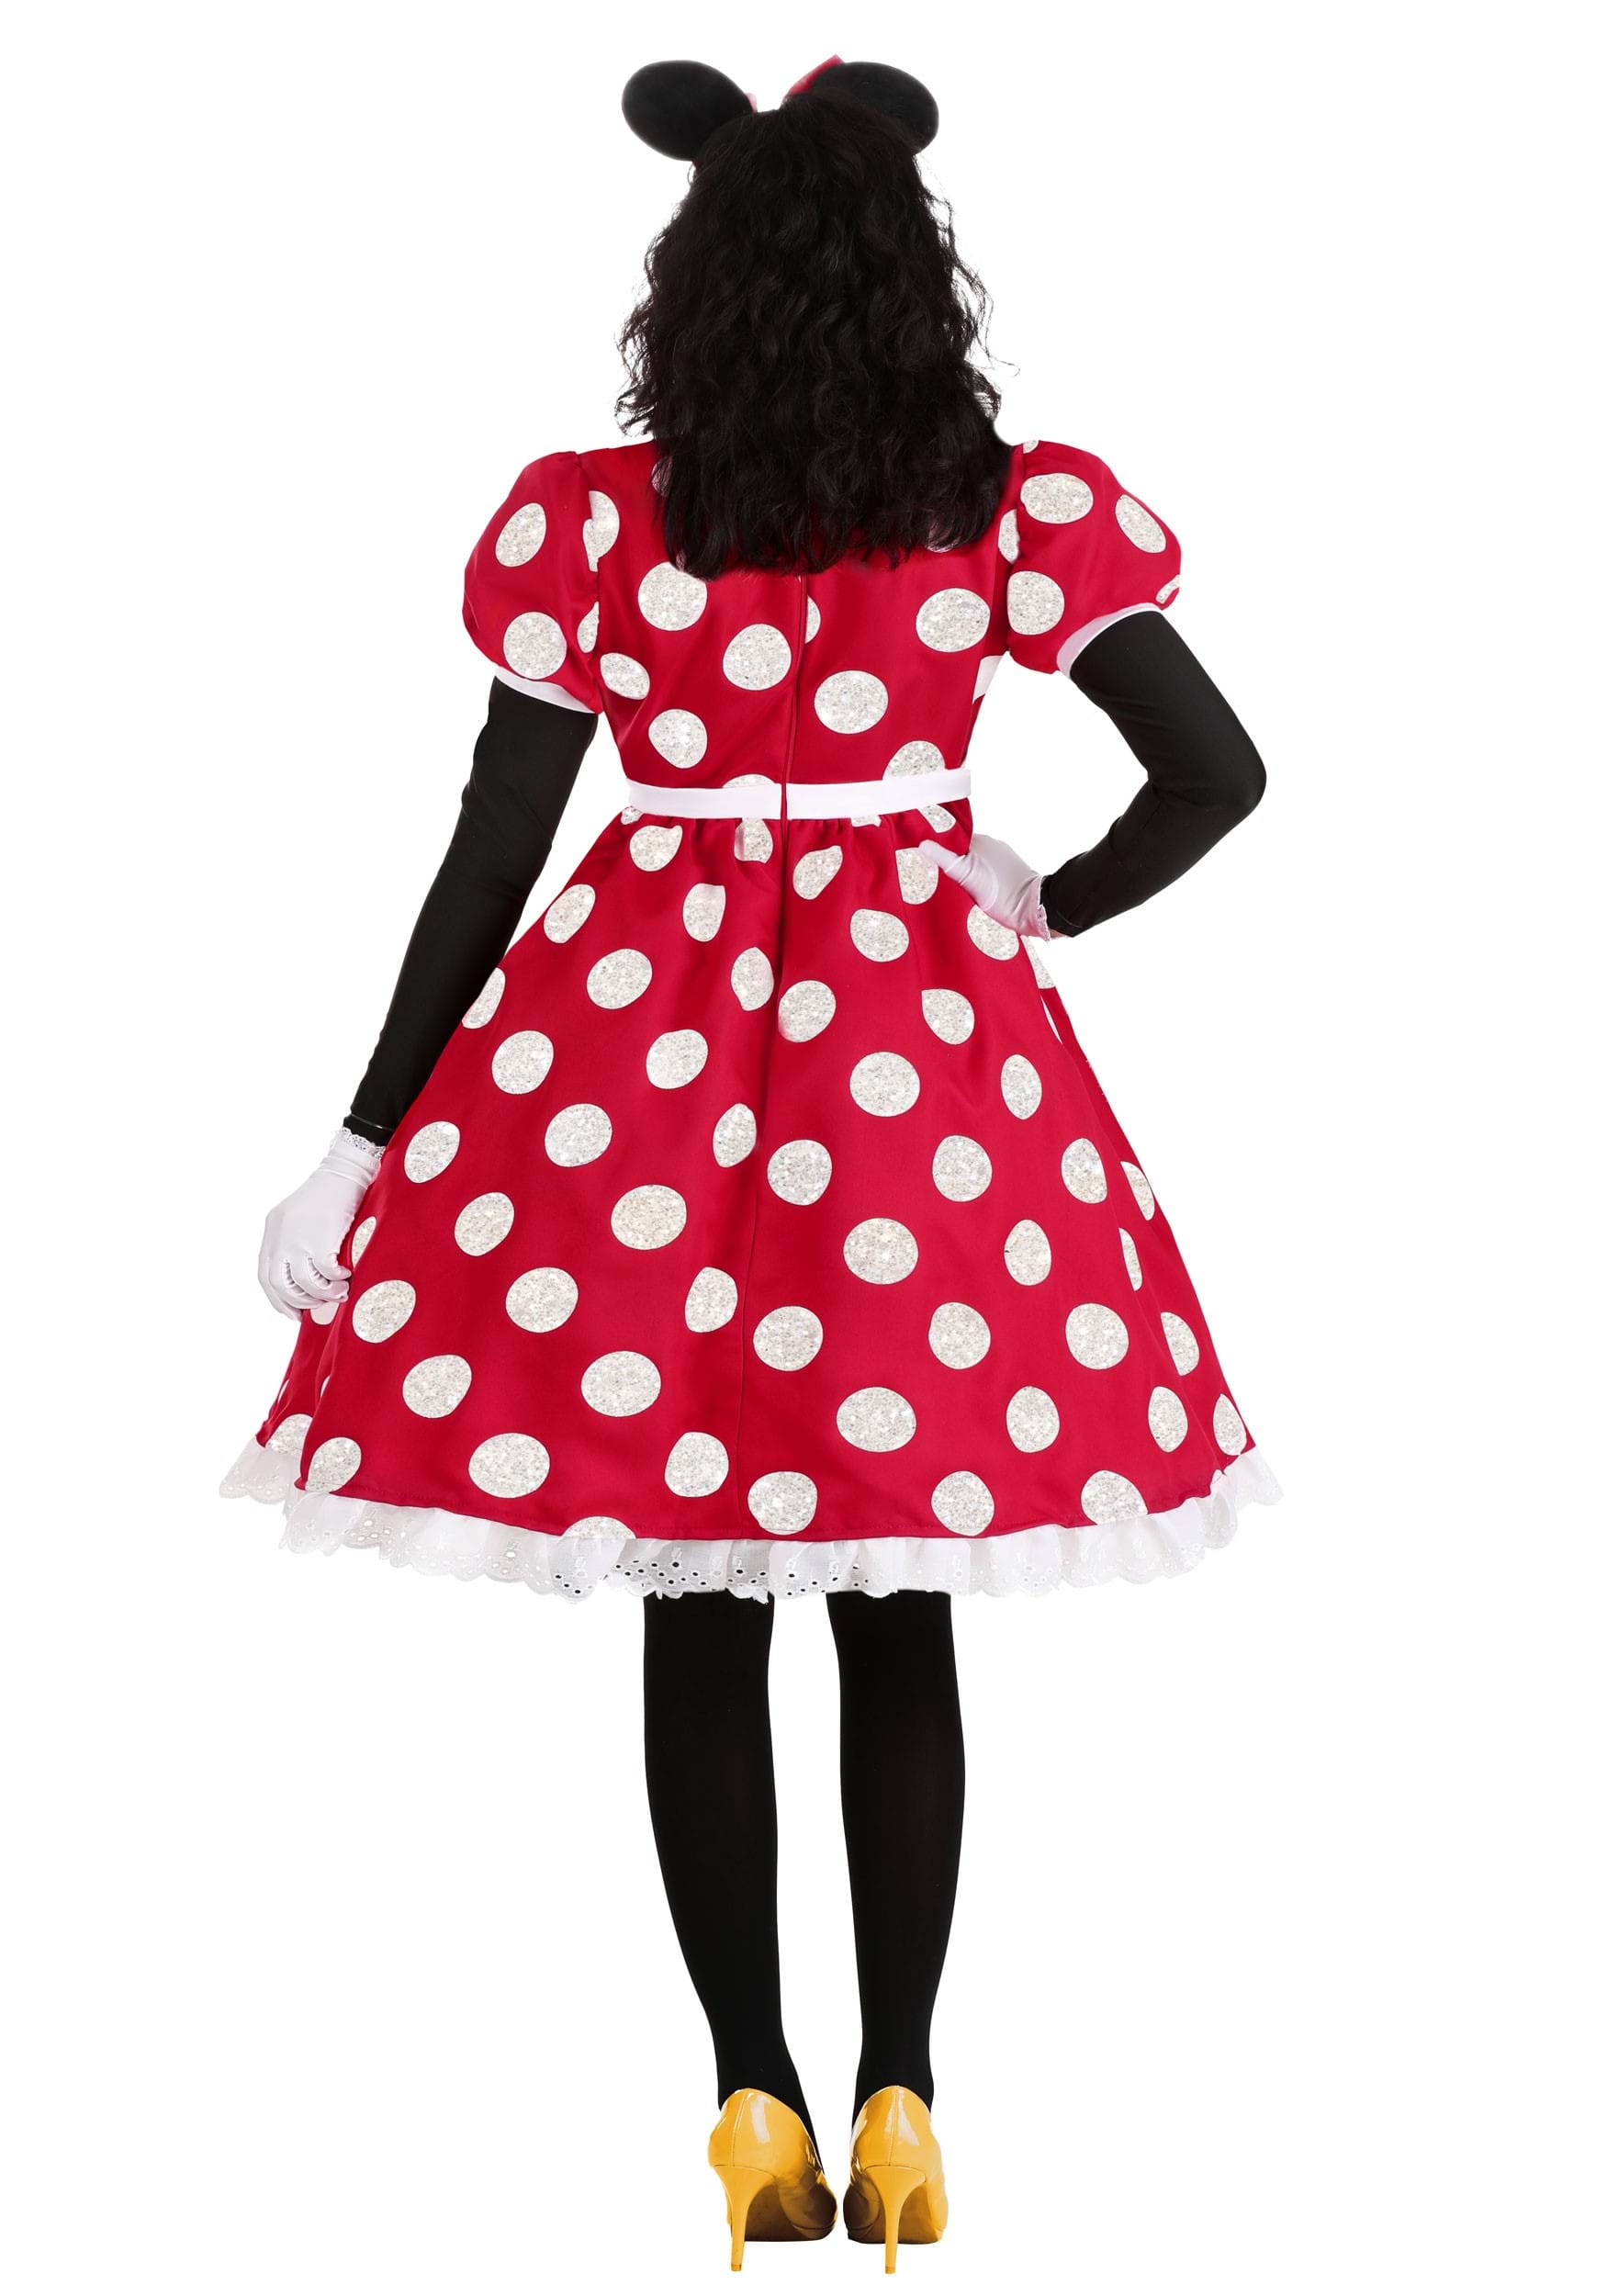 New Minnie Mouse Costume Girls Toddler Baby Fancy Dress Outfit